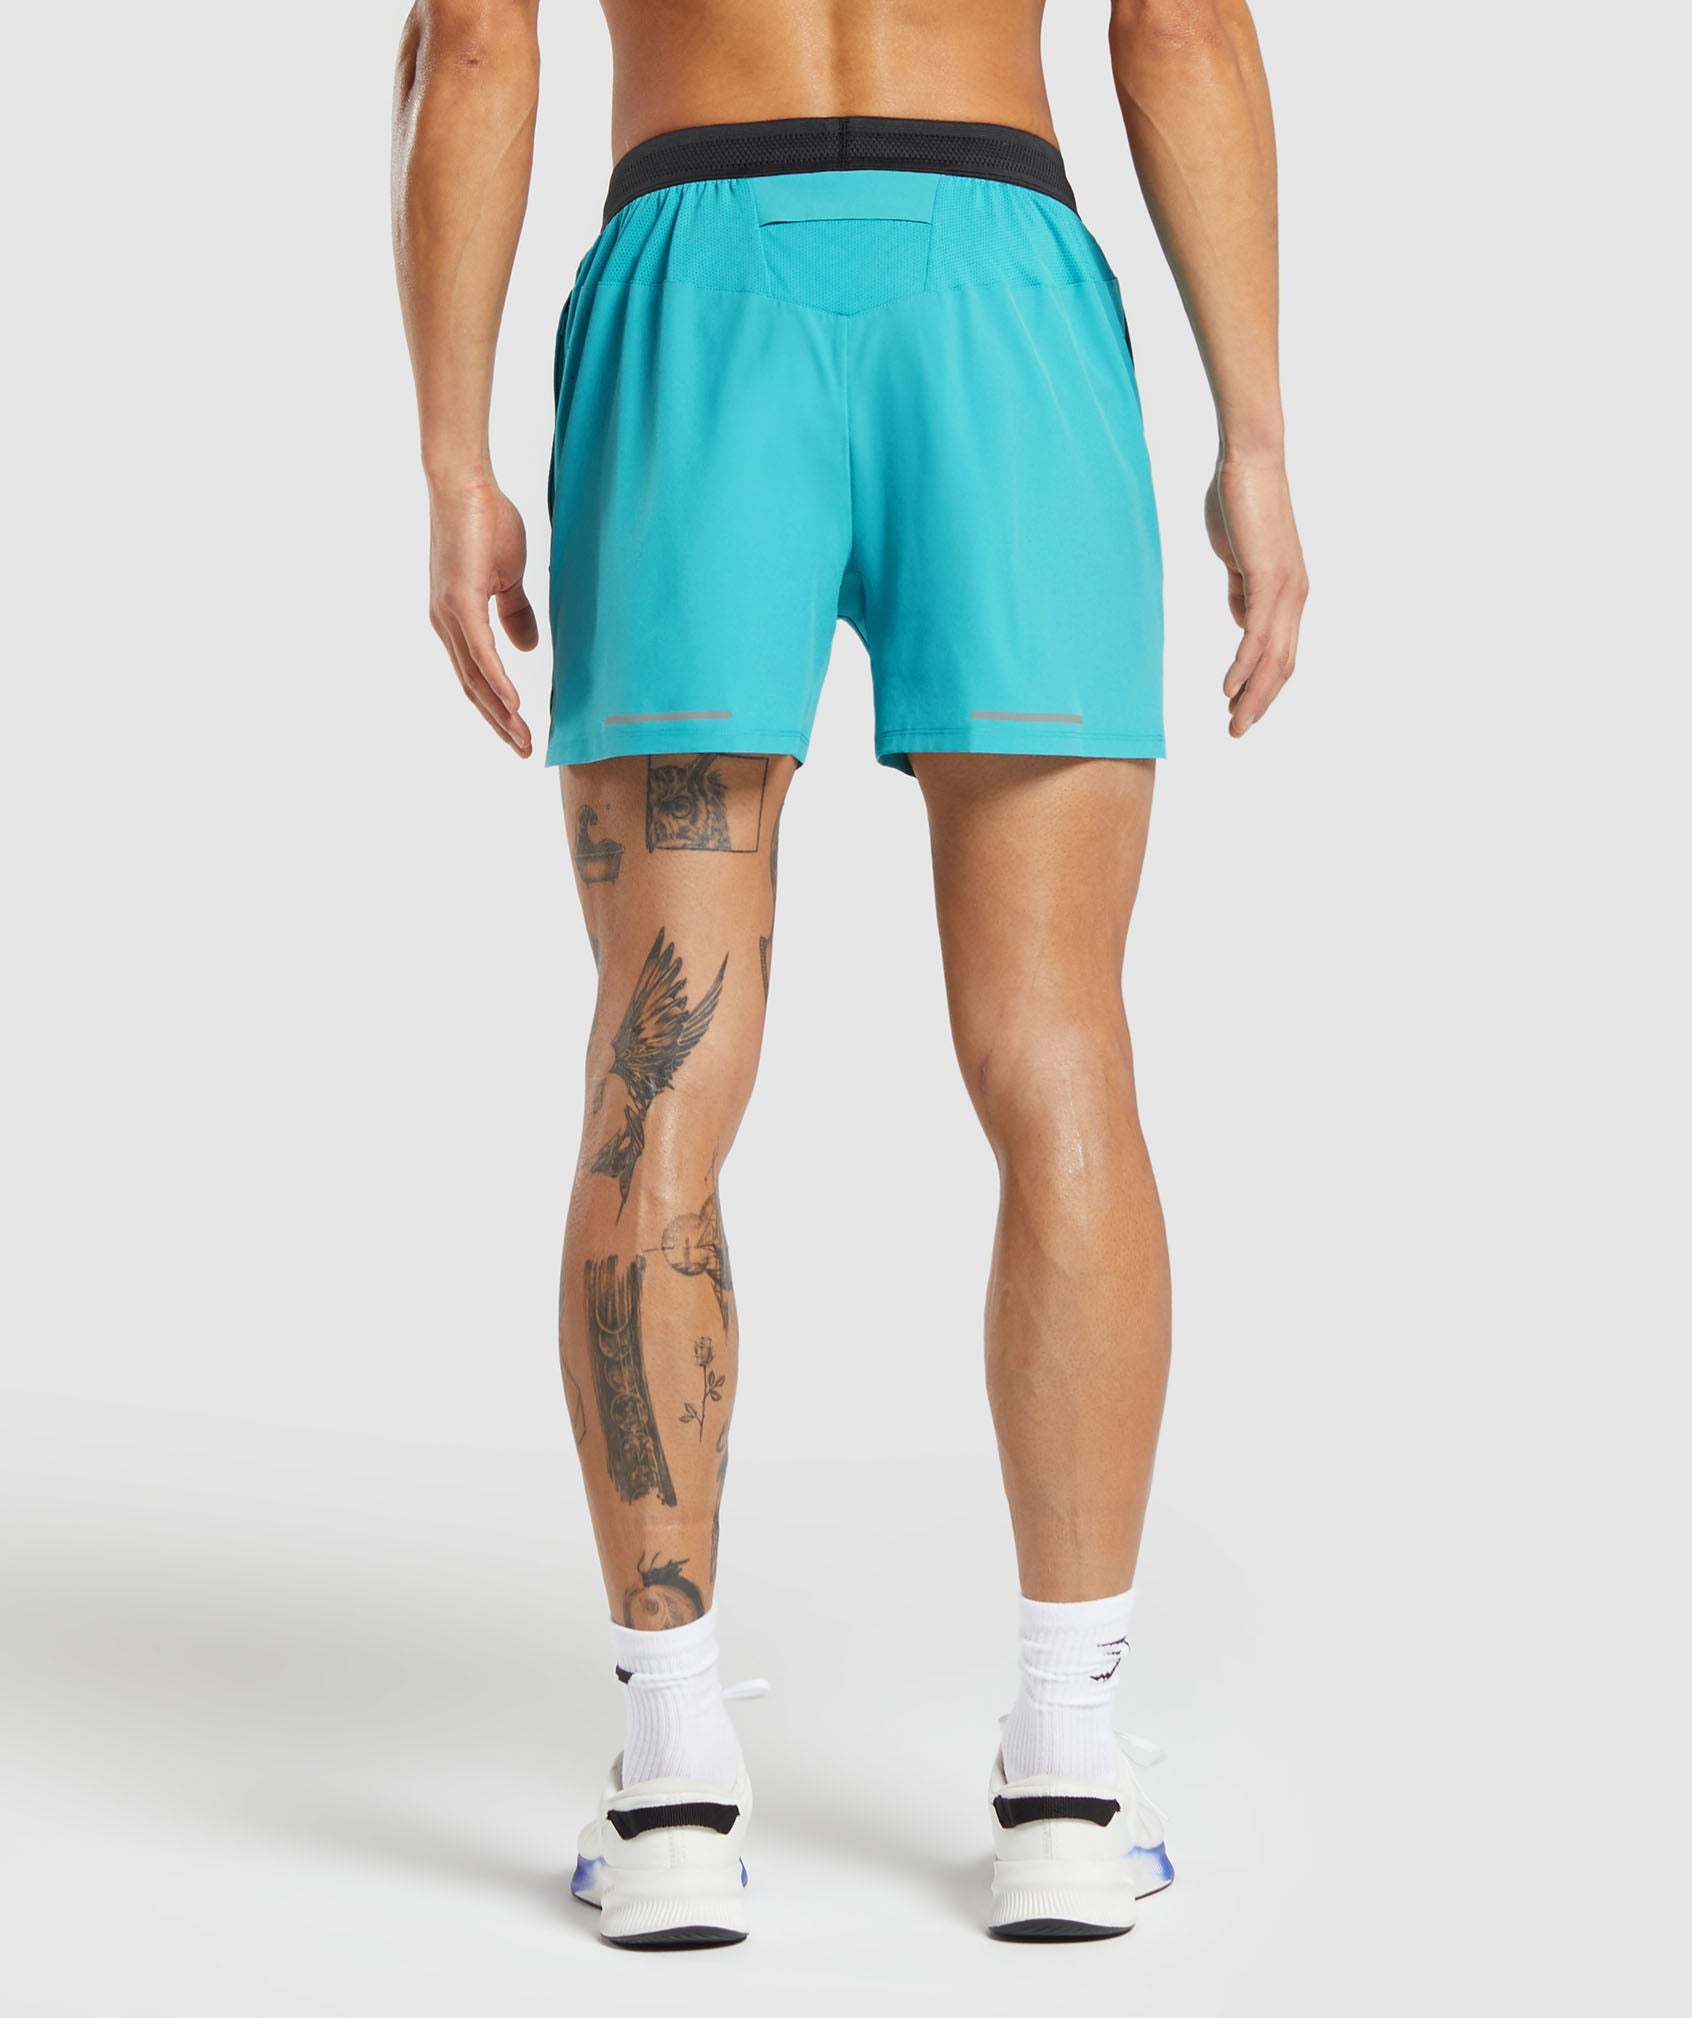 Speed 5" Shorts in Artificial Teal - view 2